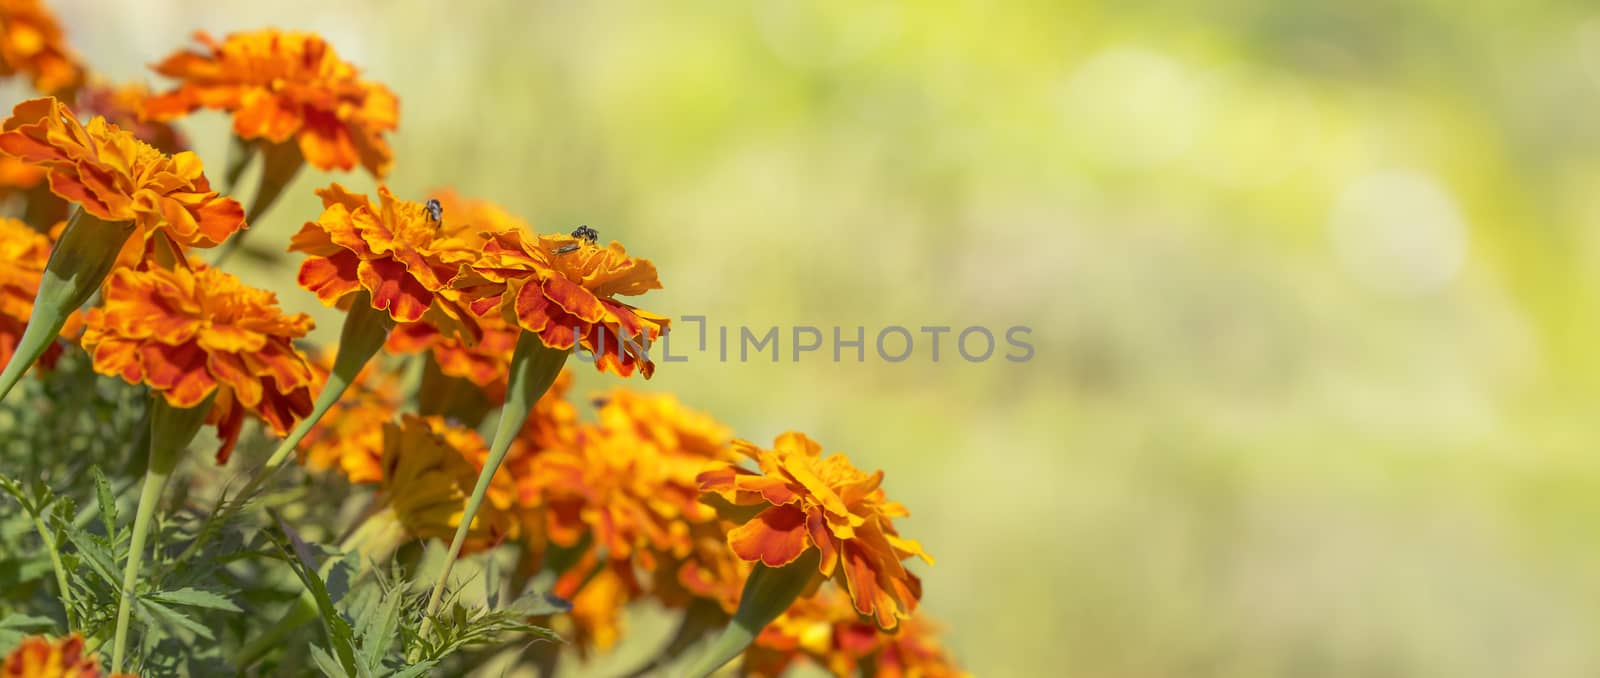 Colorful Golden Marigolds Background by sherj